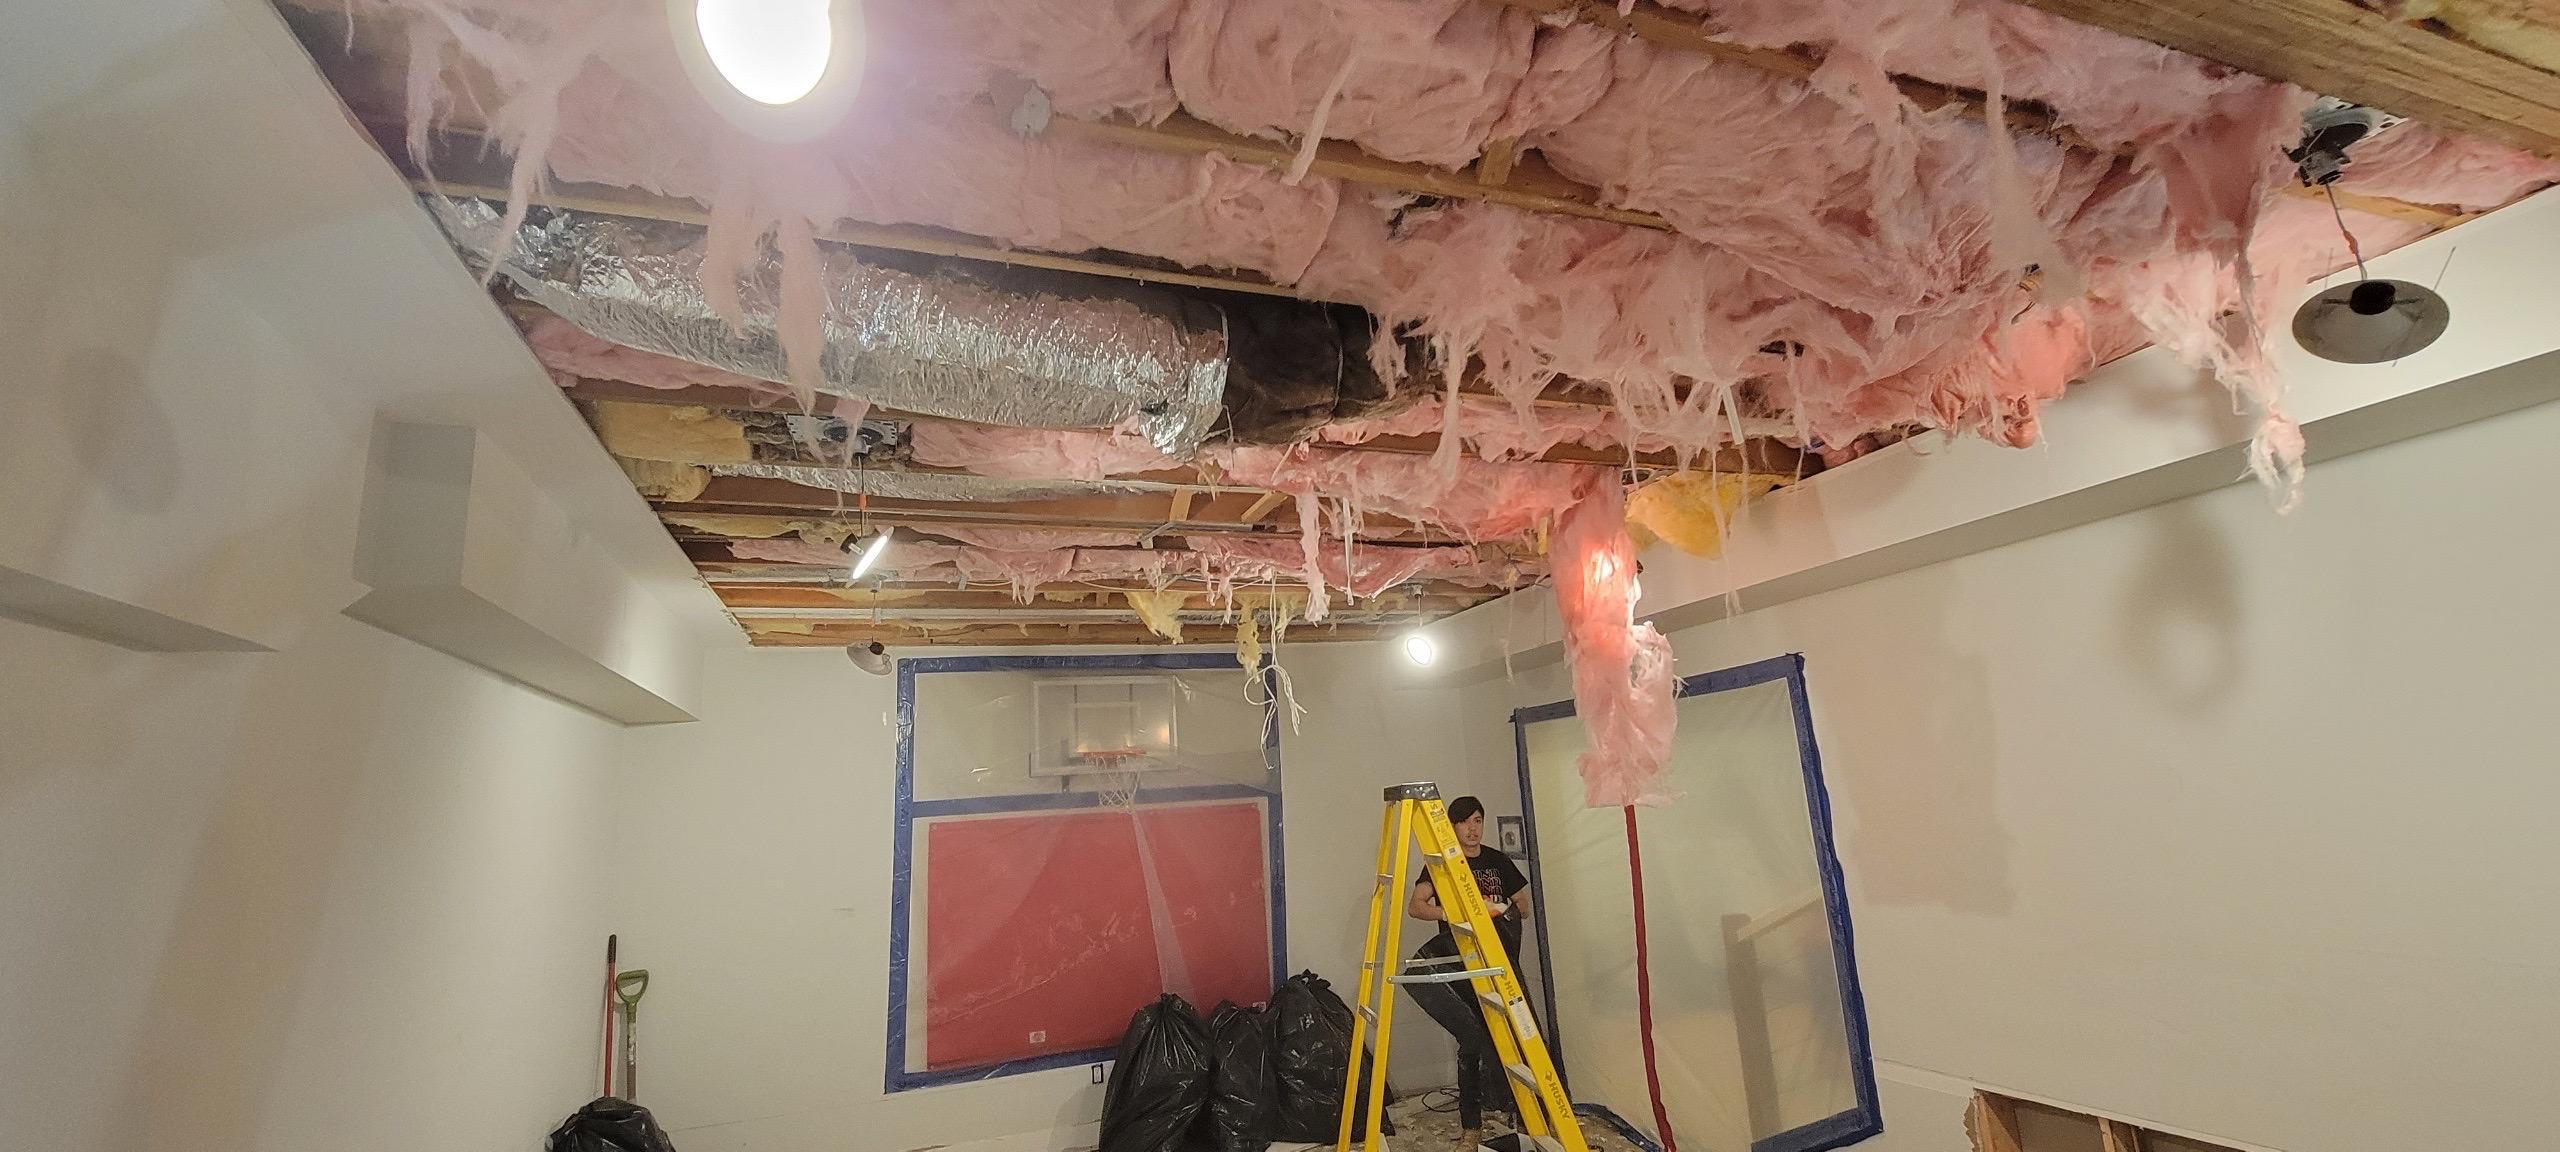 Insulation removal